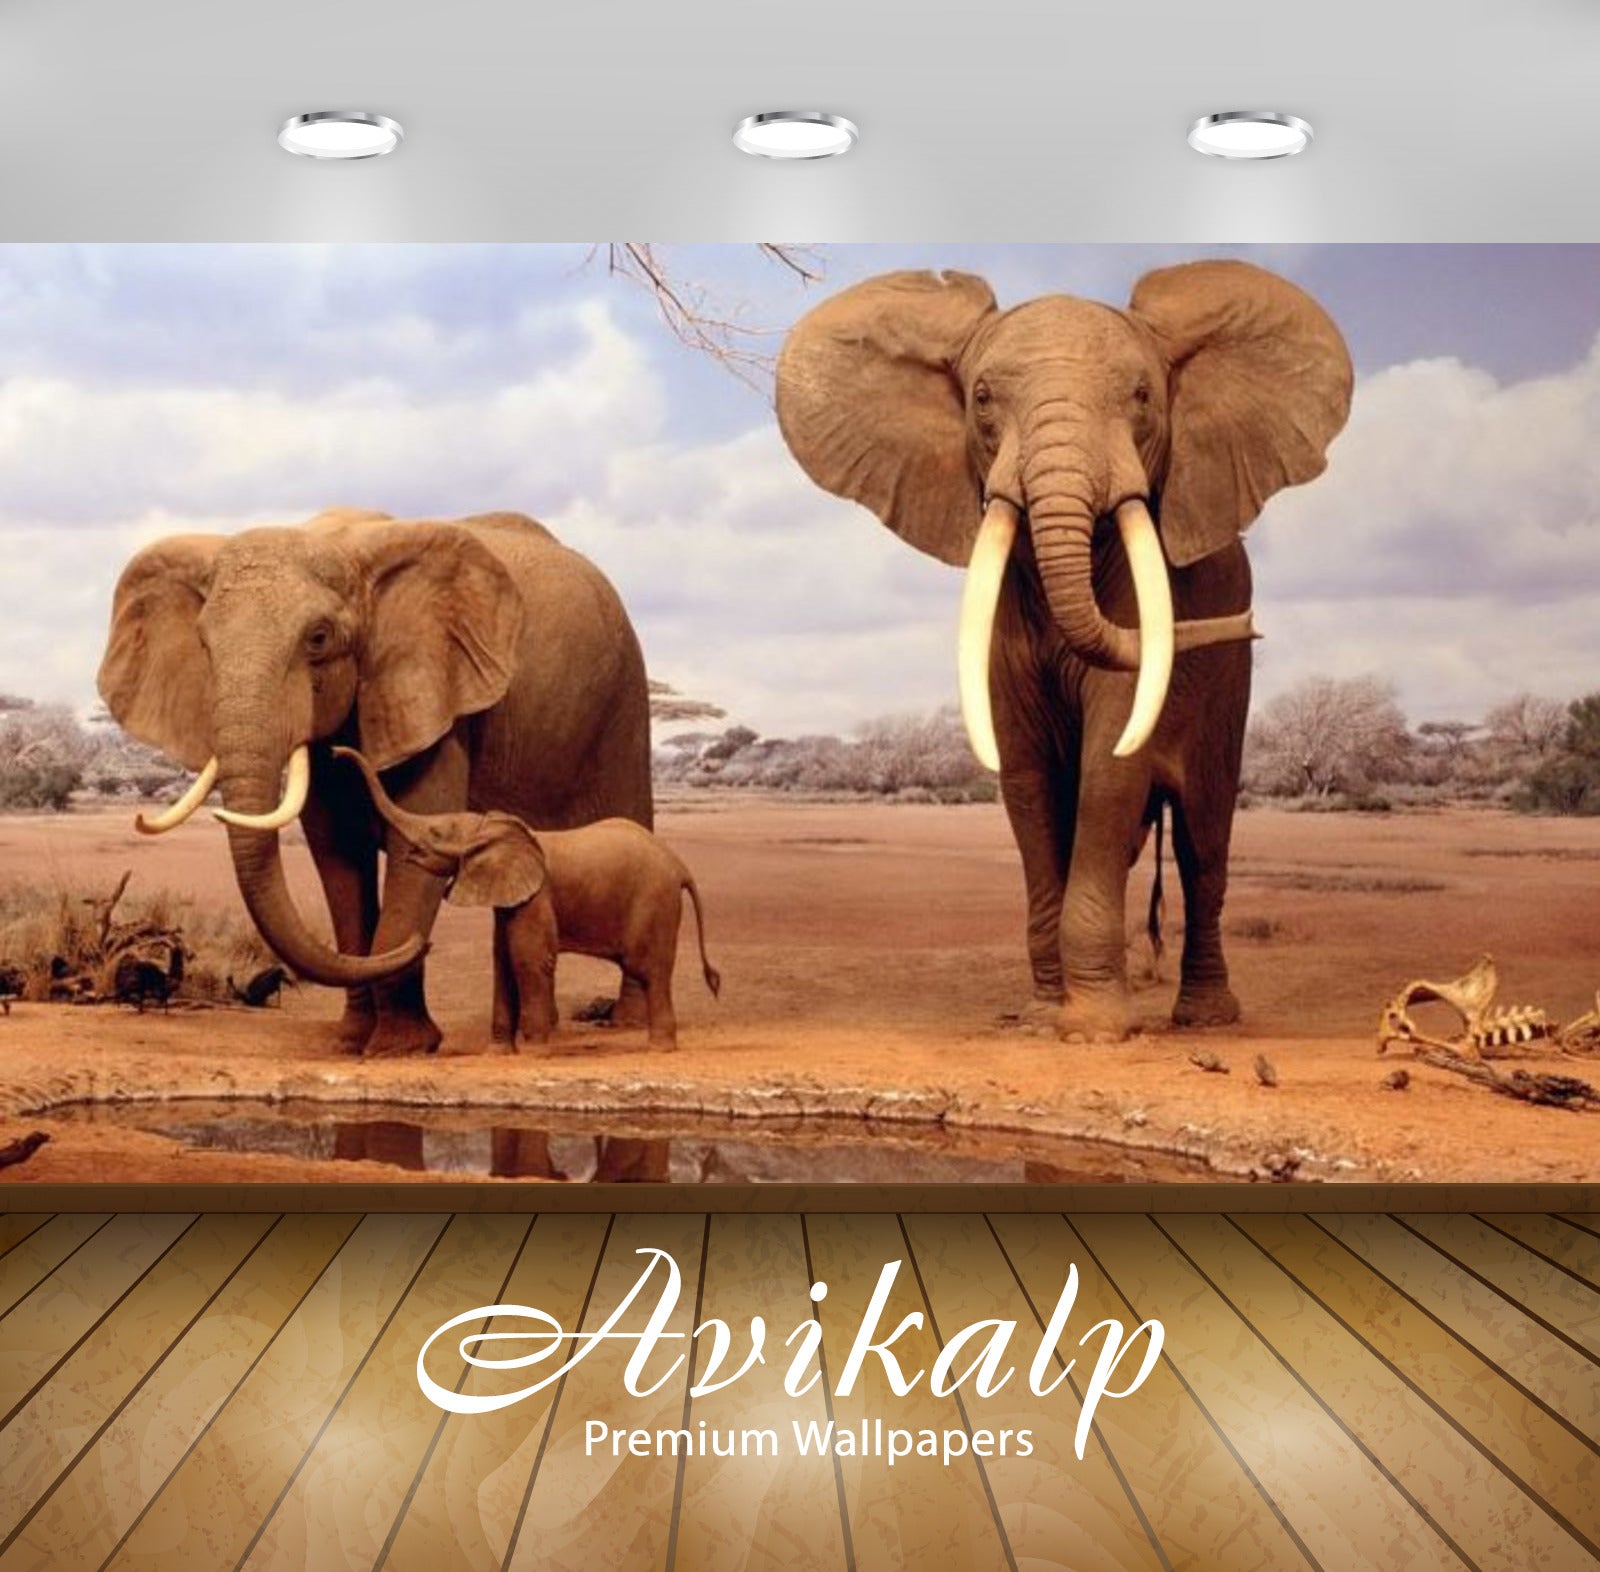 Avikalp Exclusive Awi2589 Elephants African Safari Full HD Wallpapers for Living room, Hall, Kids Ro